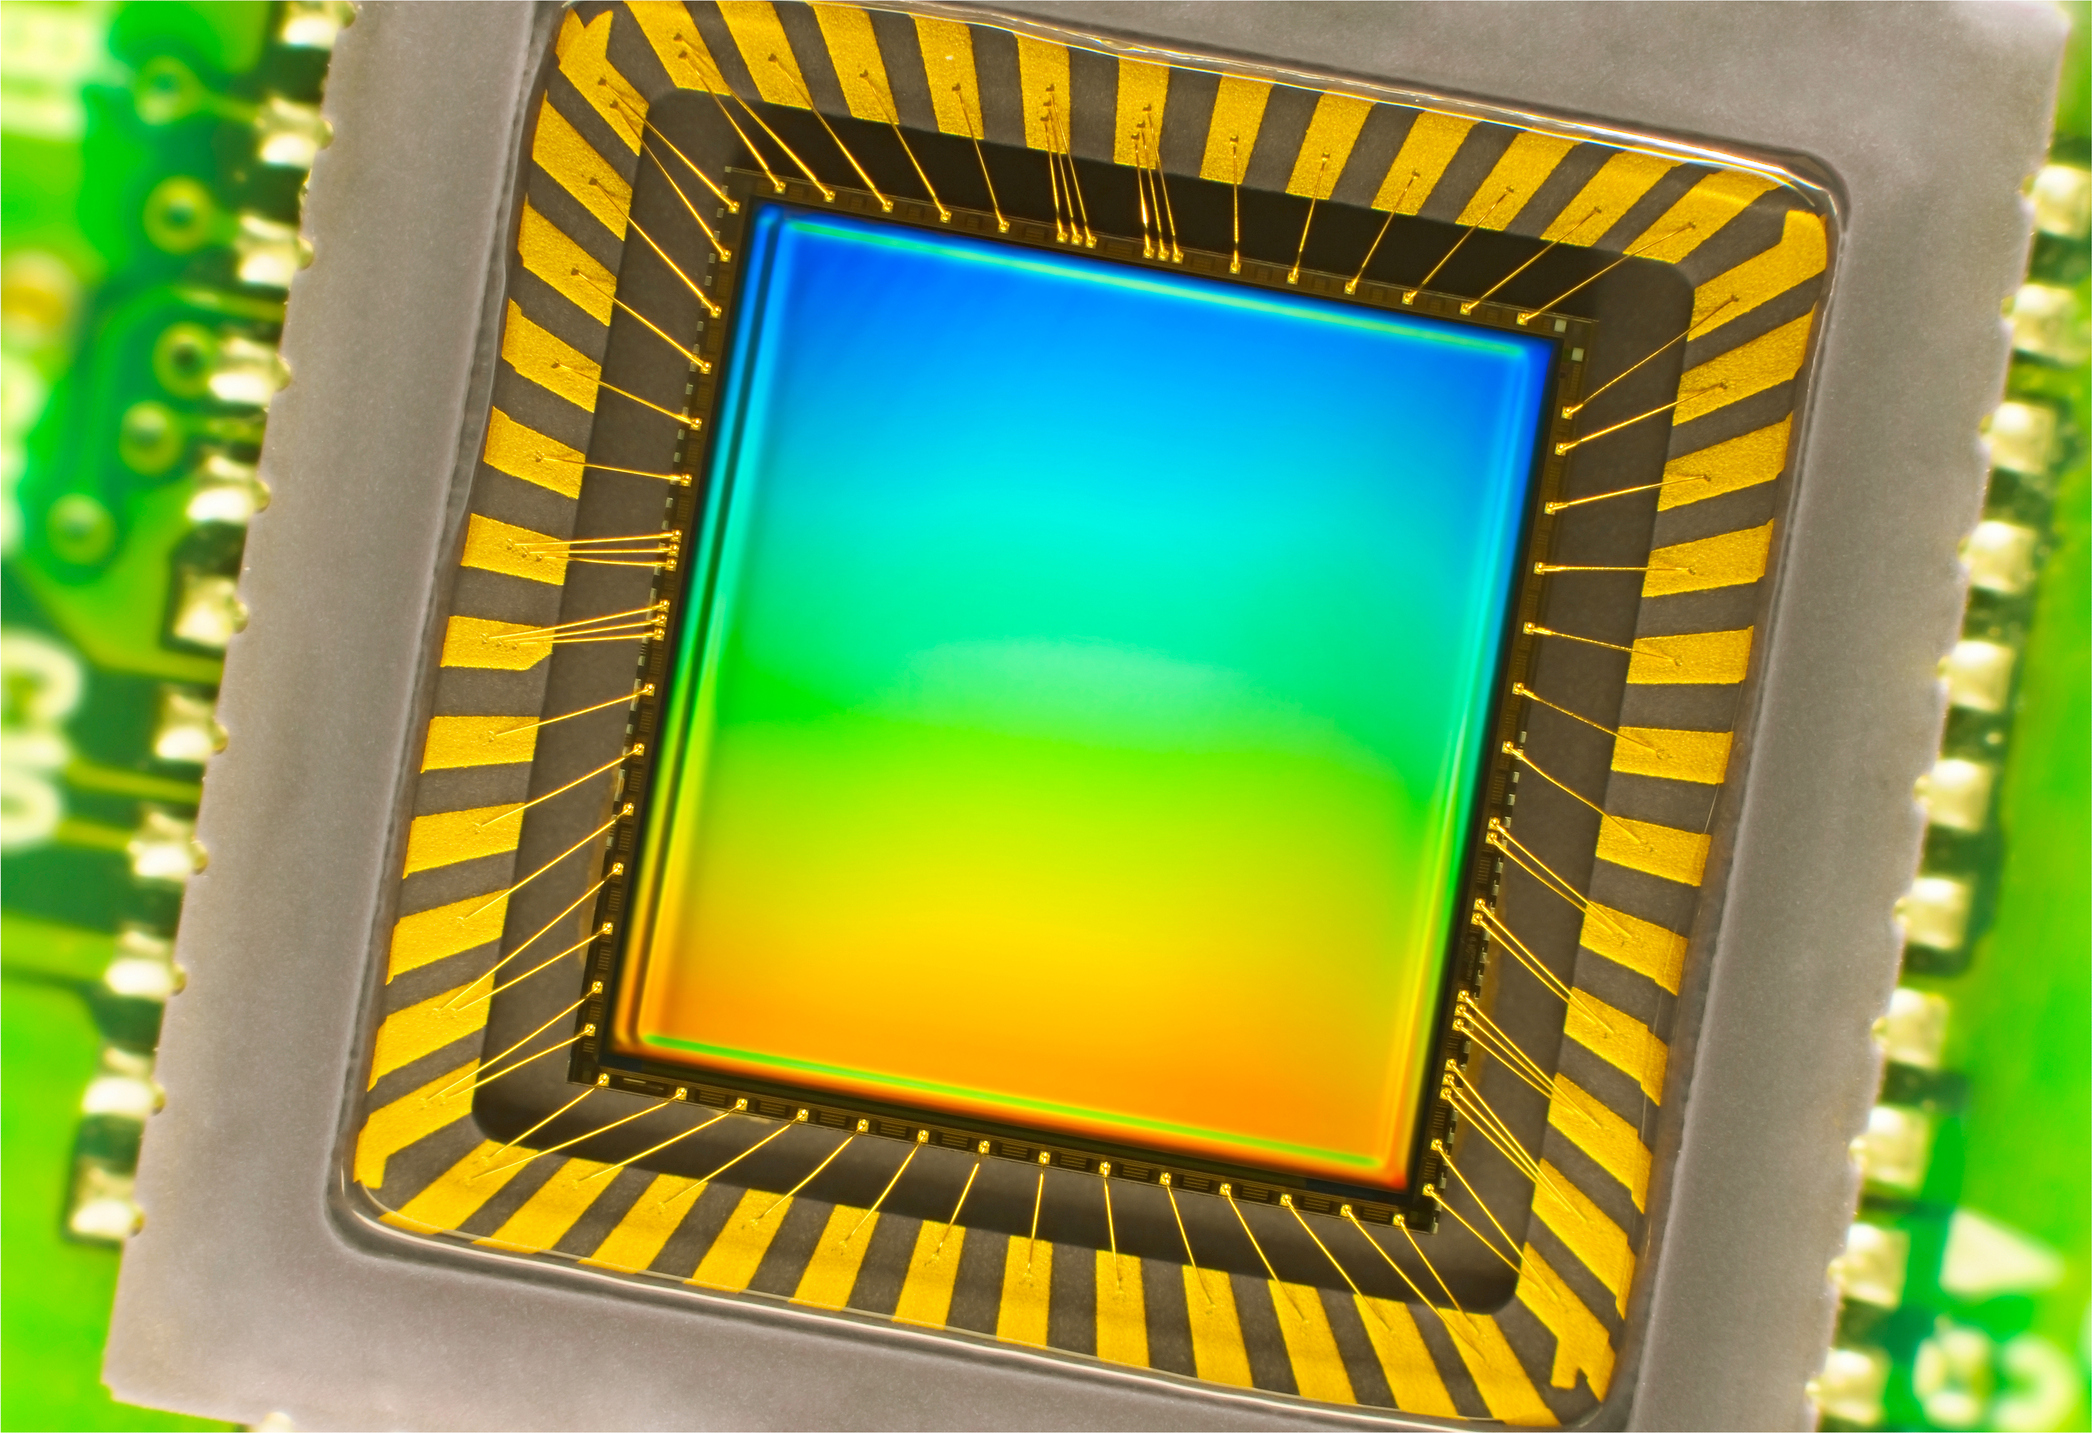 An image sensor one might find in a digital camera.